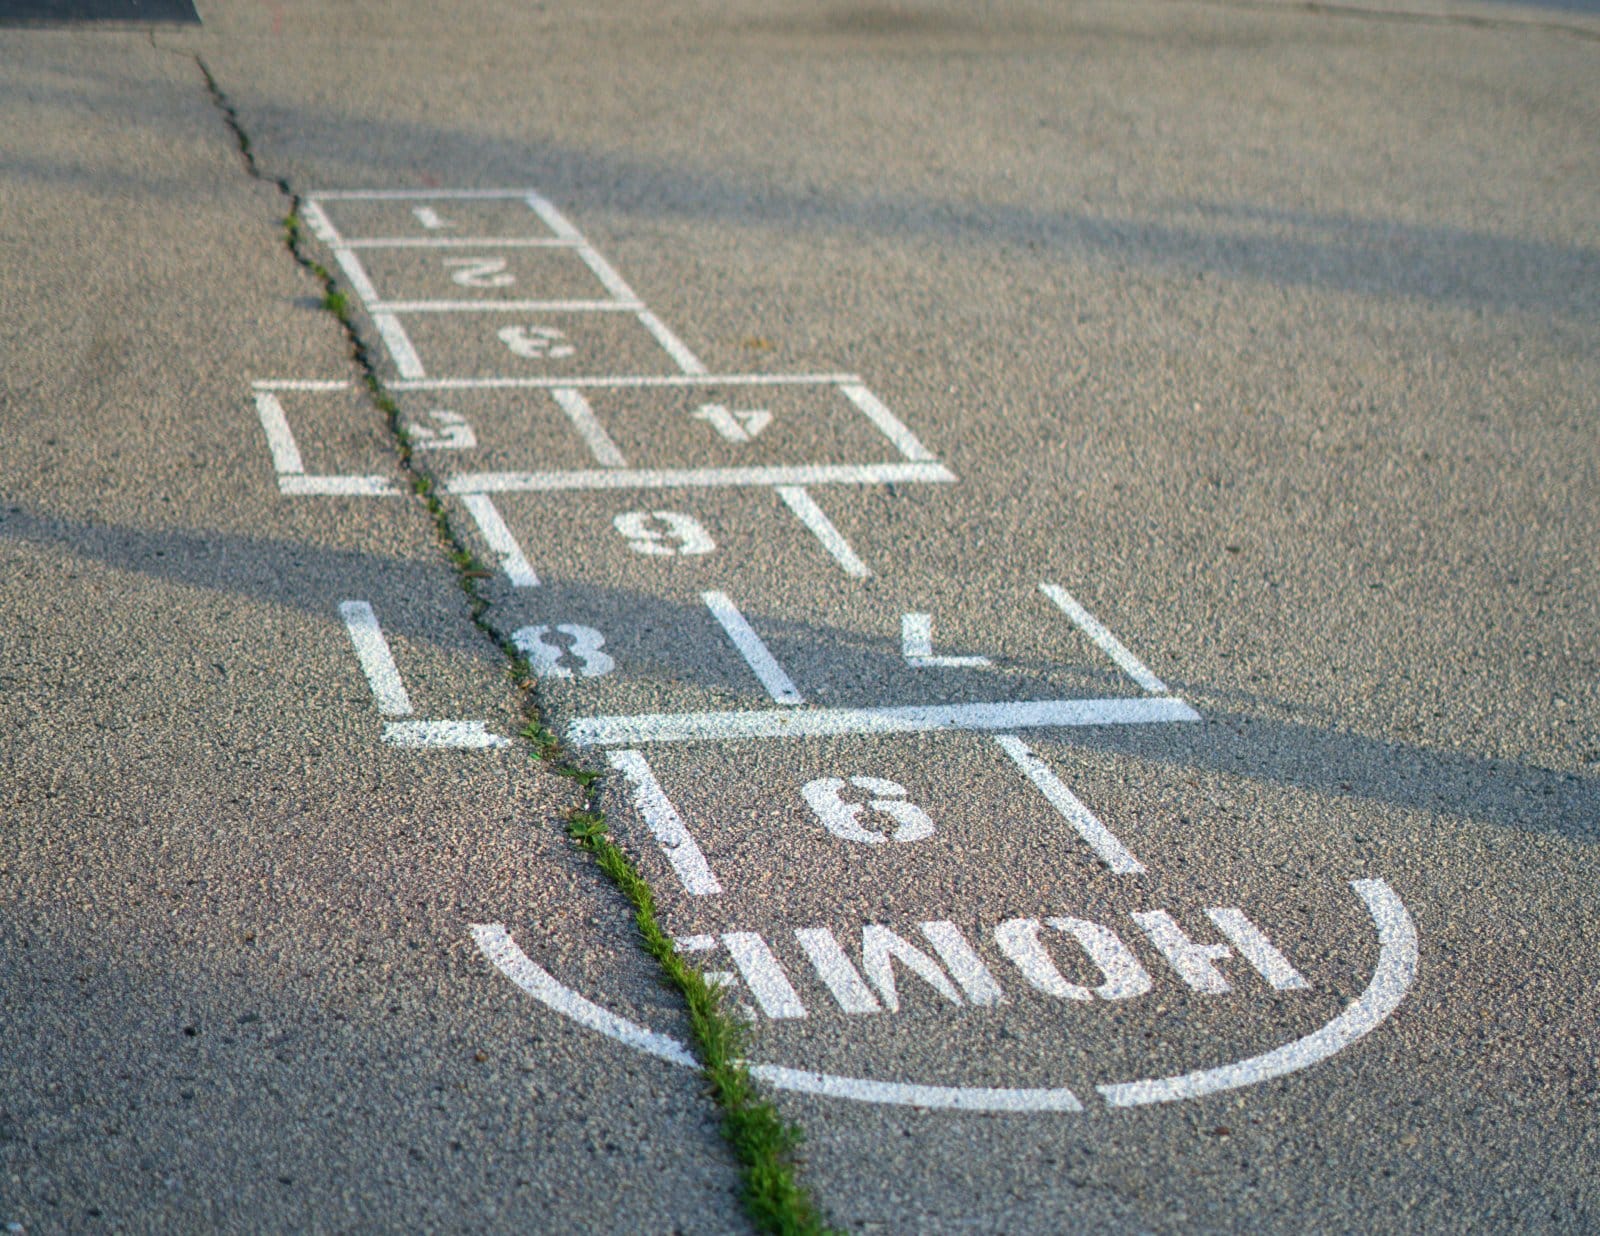 Image Credit: Pexel / Legend Vibe <p><span>Hopscotch combines physical skill, balance, and energy, making it ideal for developing motor skills in younger players. Drawing the board also stimulates creativity, and the game’s simple rules make it accessible for family members of various ages to play together.</span></p>